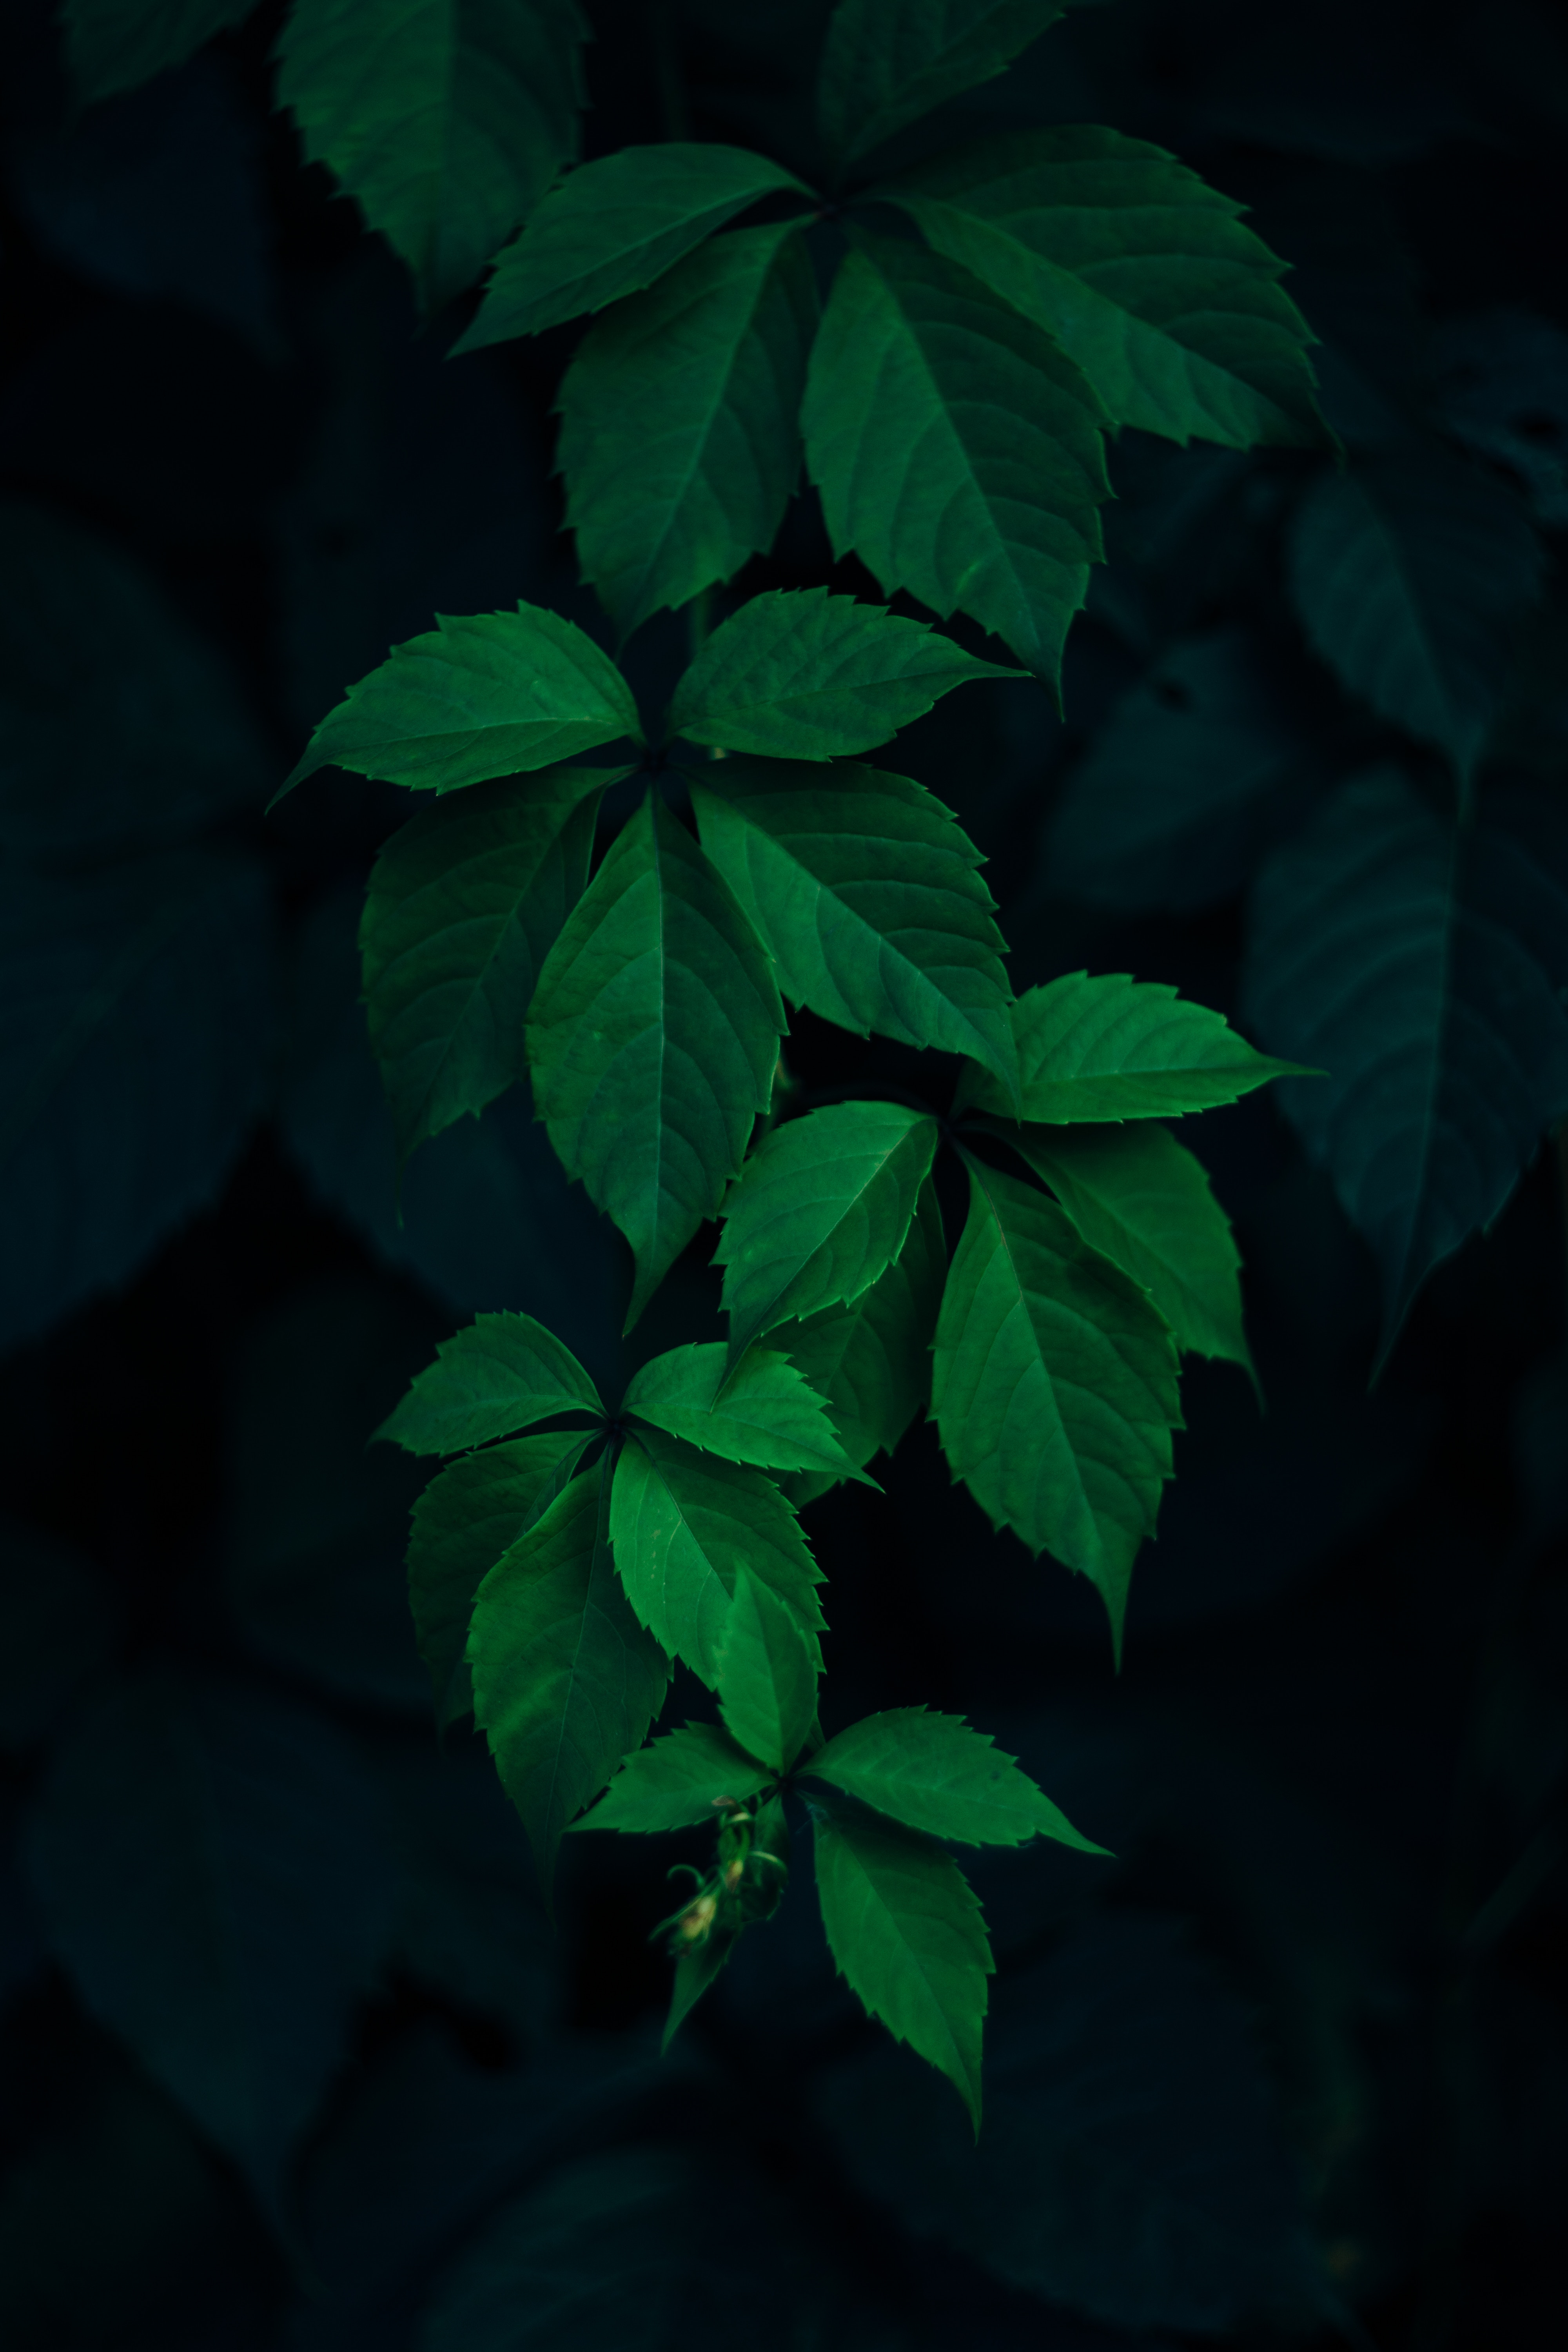 leaves, branches, green, nature, dark background